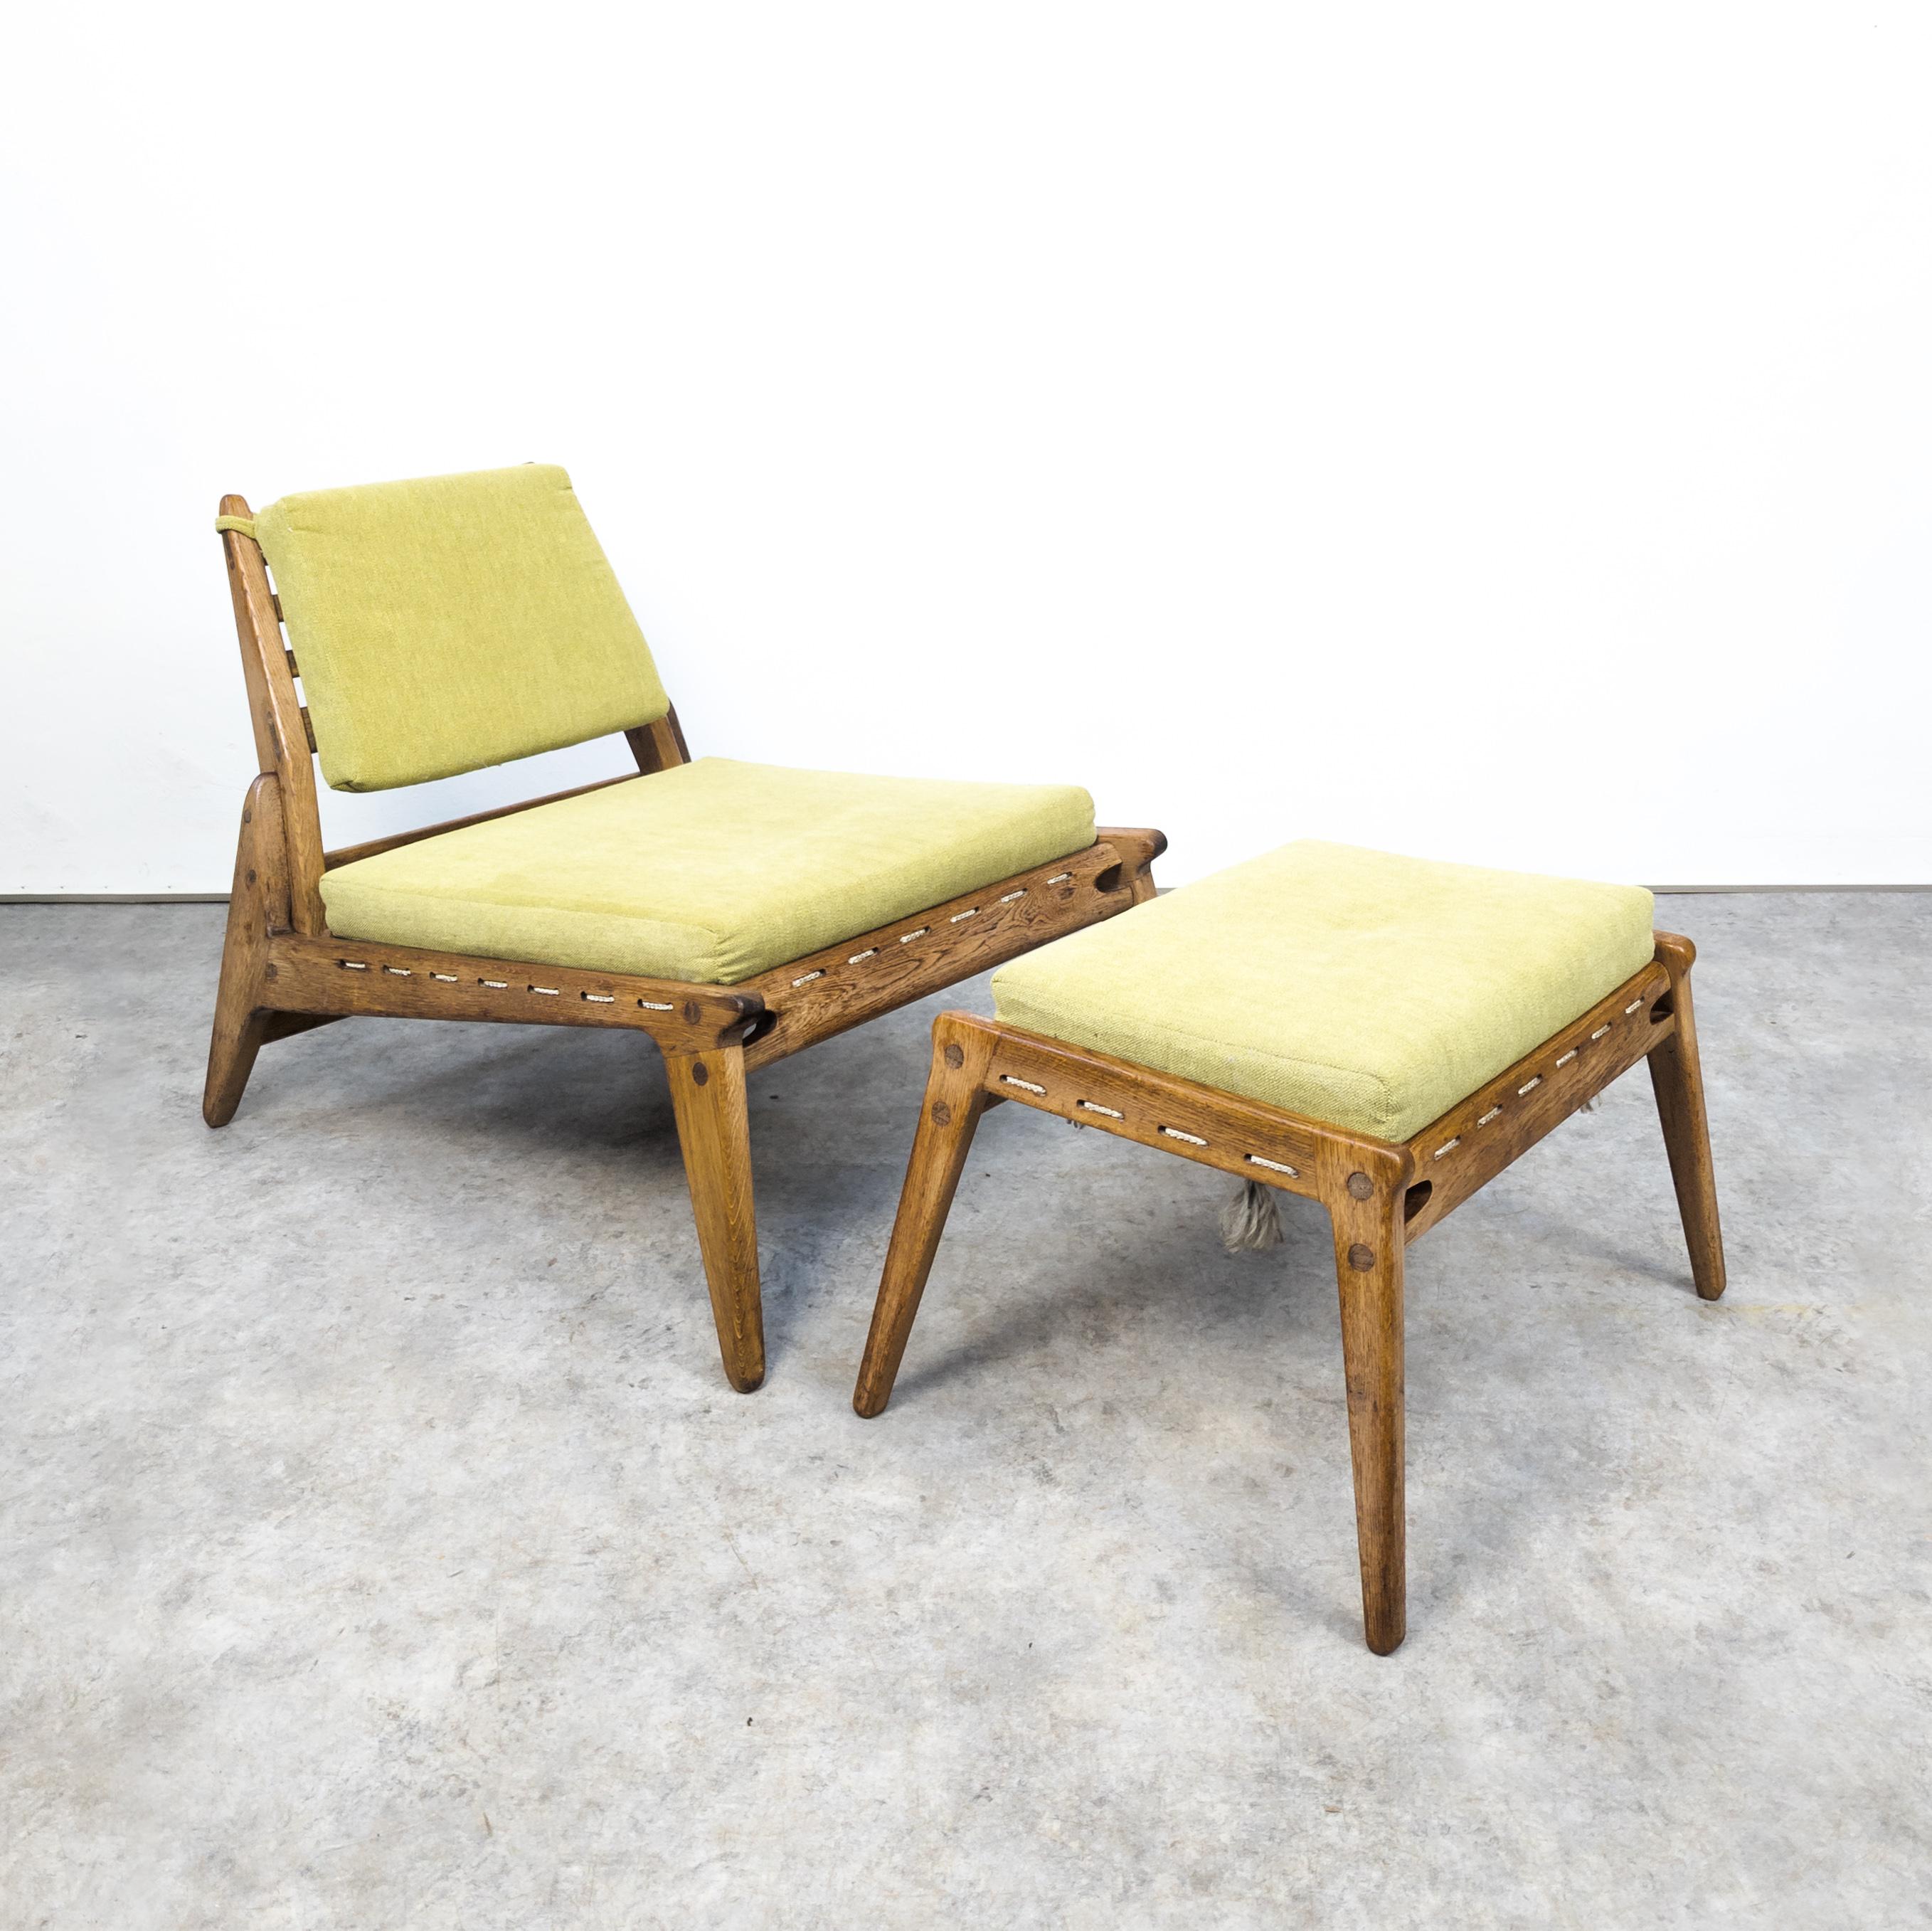 Manufactured by PGH Erzgebirgisches Kunsthandwerk Annaberg Buchholz, Germany in the 1950s. Pair of lounge chairs with ottomans, crafted from oak and fabric in Germany during the 1950s. These relaxing chairs, reminiscent of hunting chairs, boast a